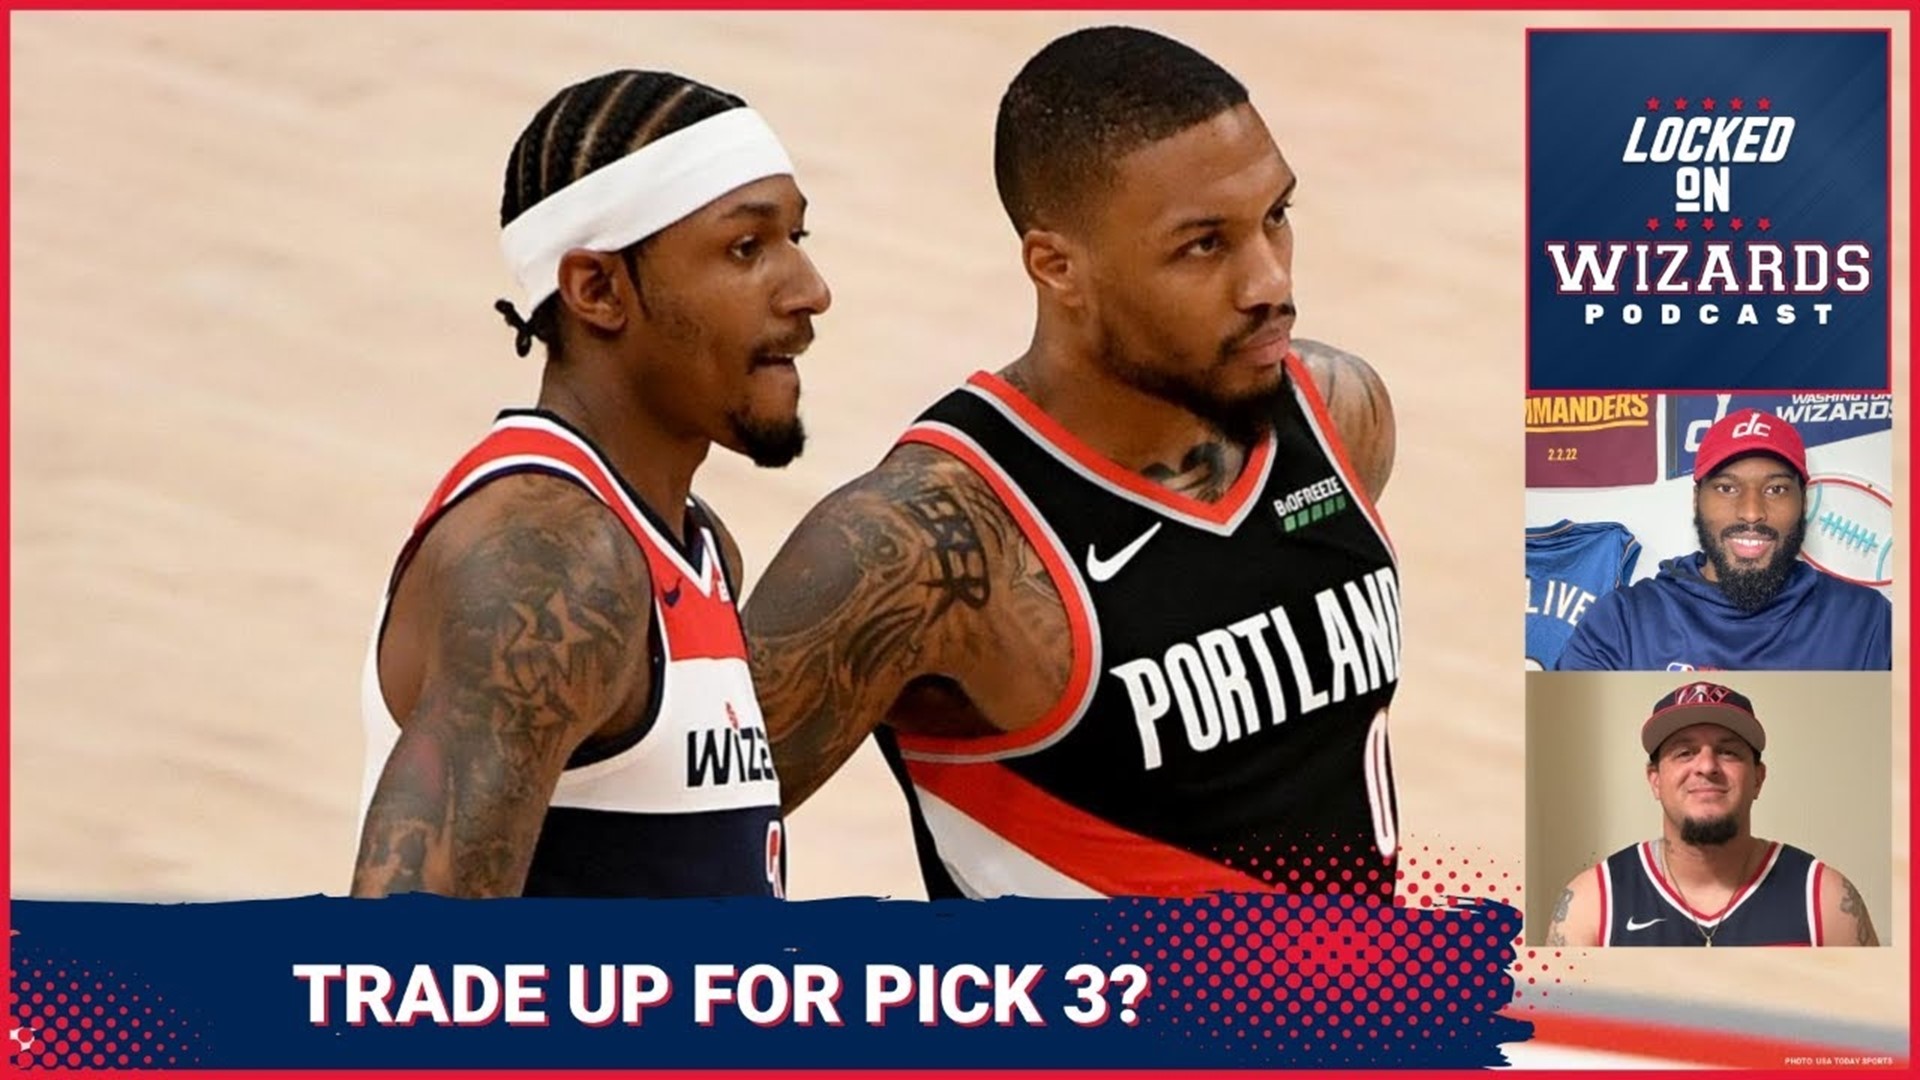 Ed Oliver & Brandon Scott discuss how the Wizards can trade up for pick number 3 and how likely it will happen.